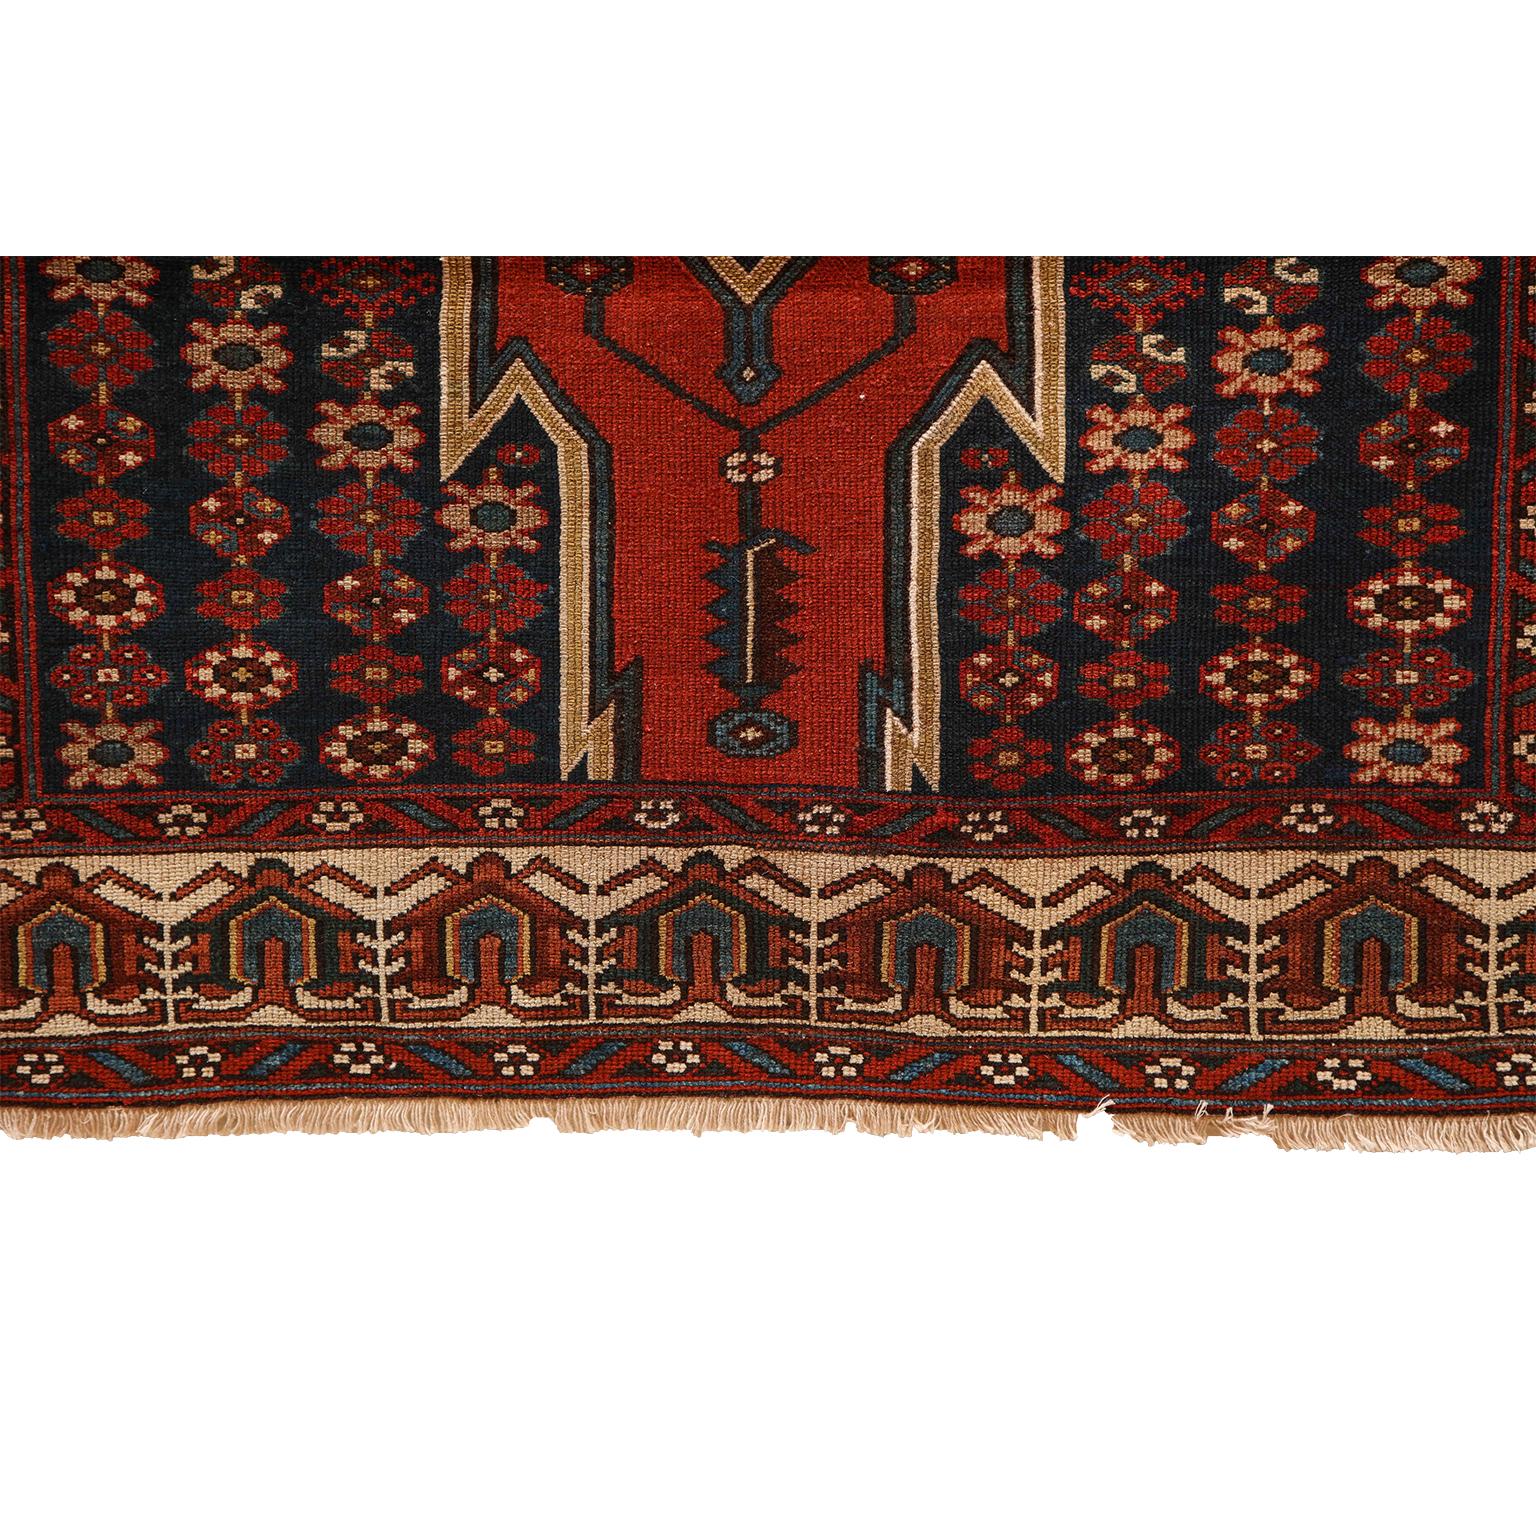 Antique 1920s Wool Persian Mazlaghan Rug, 4' x 6' For Sale 4